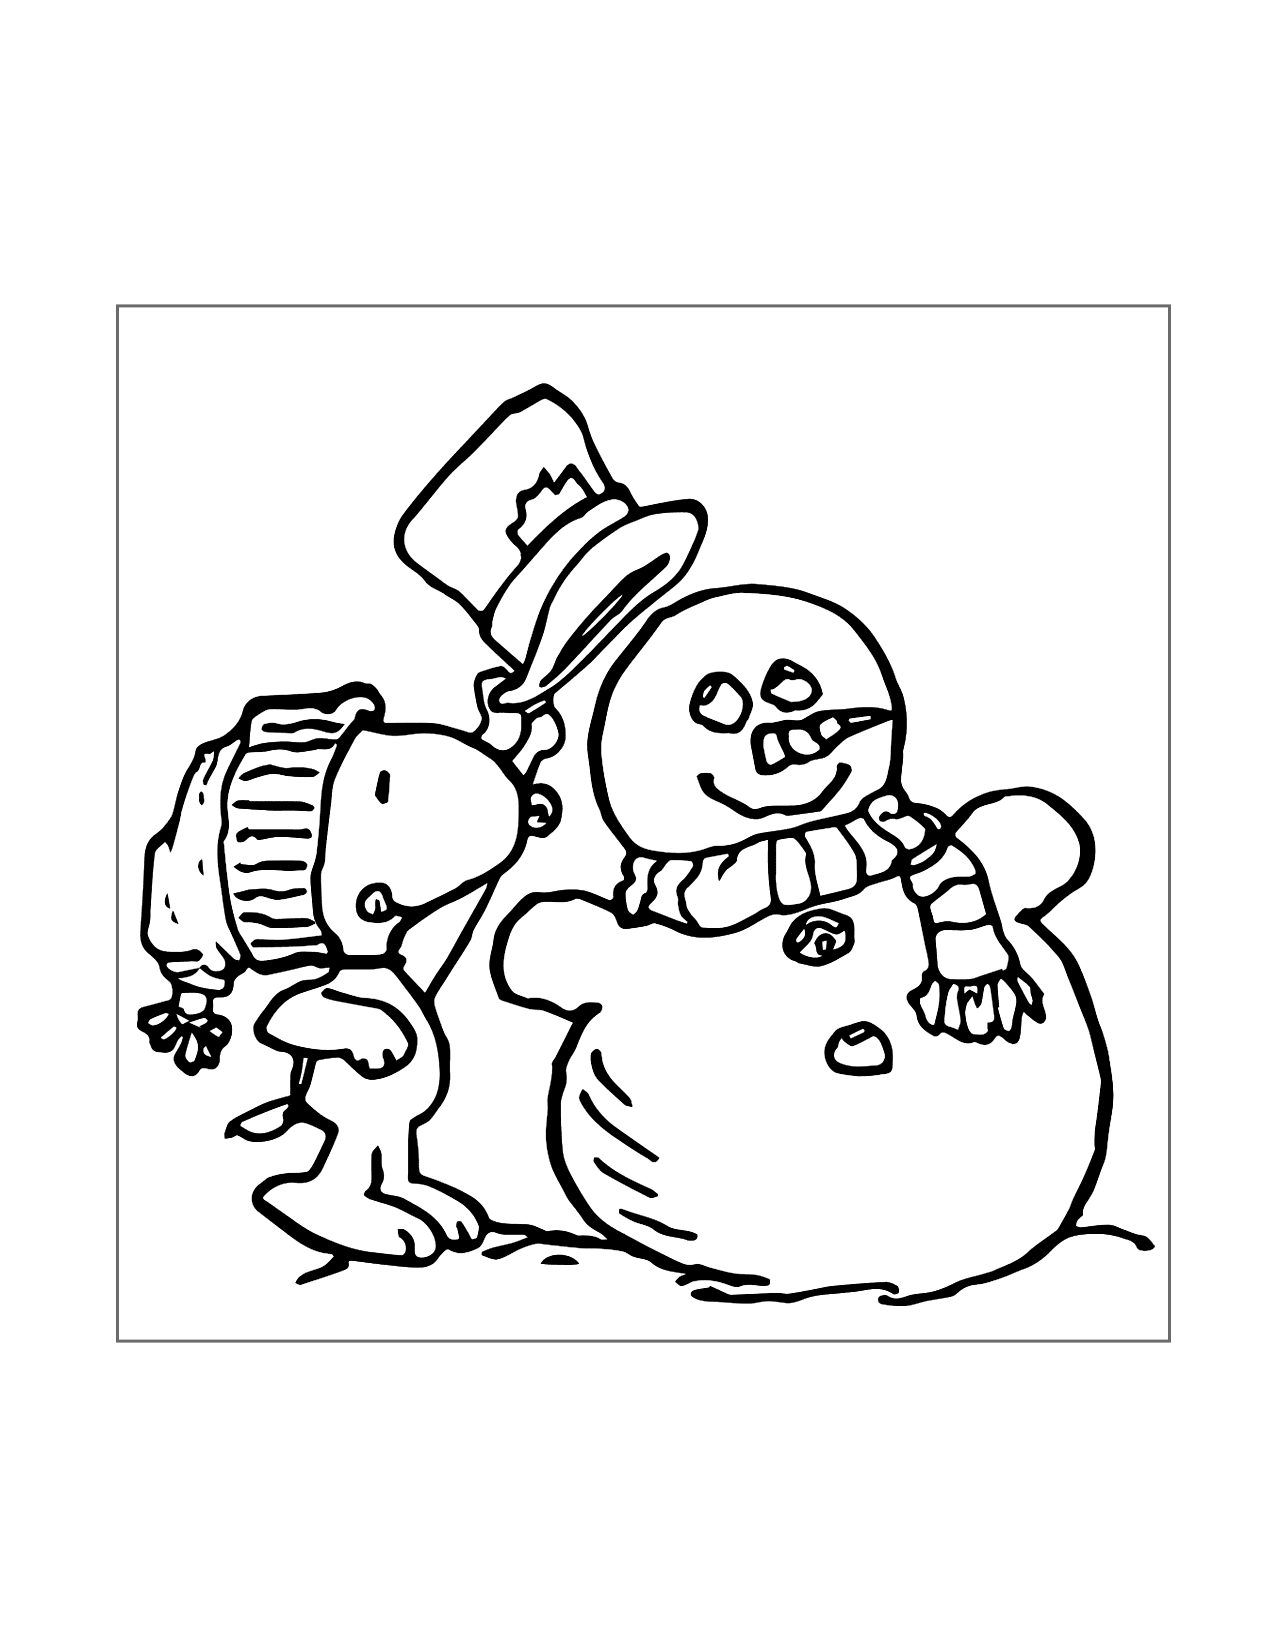 Snoopy Builds A Snowman Coloring Page